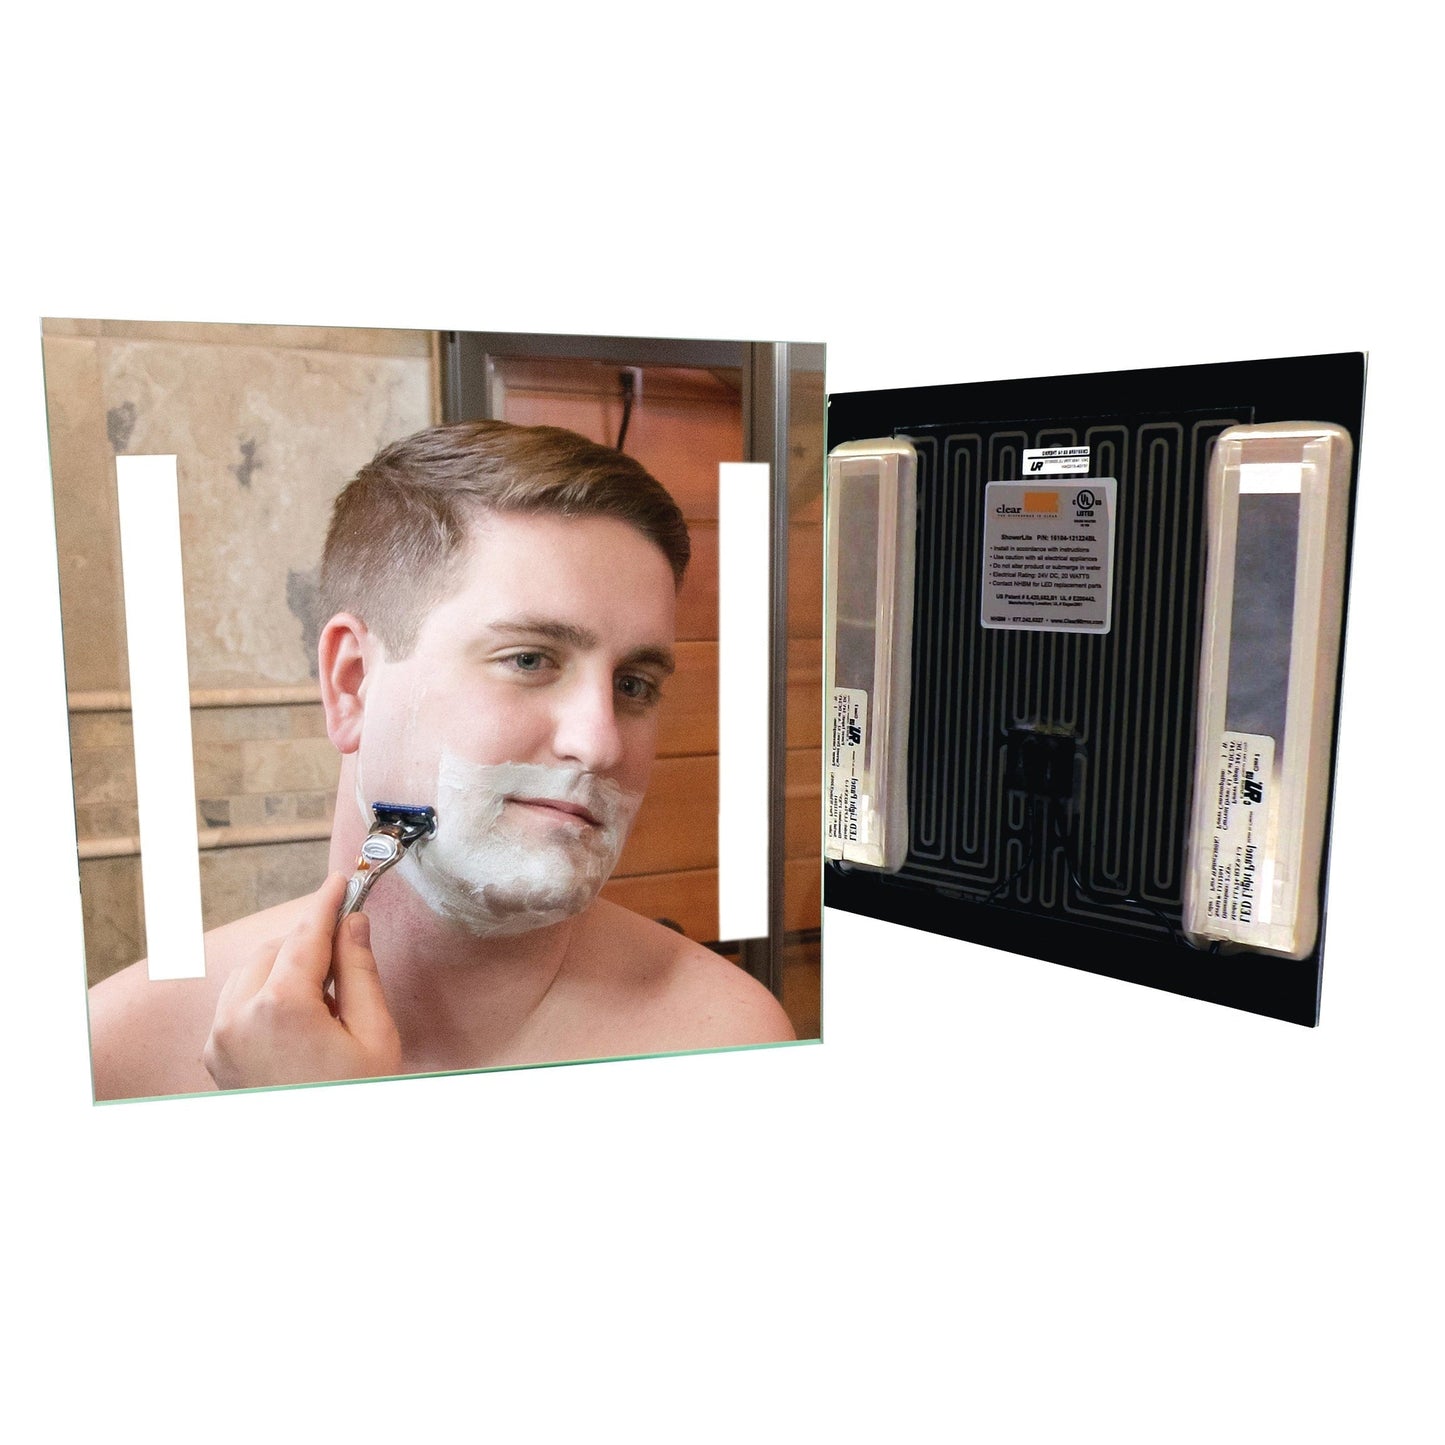 ClearMirror ShowerLite 12" x 12" Fog-Free Shower Mirror With LED Light Panels and Heating Pad